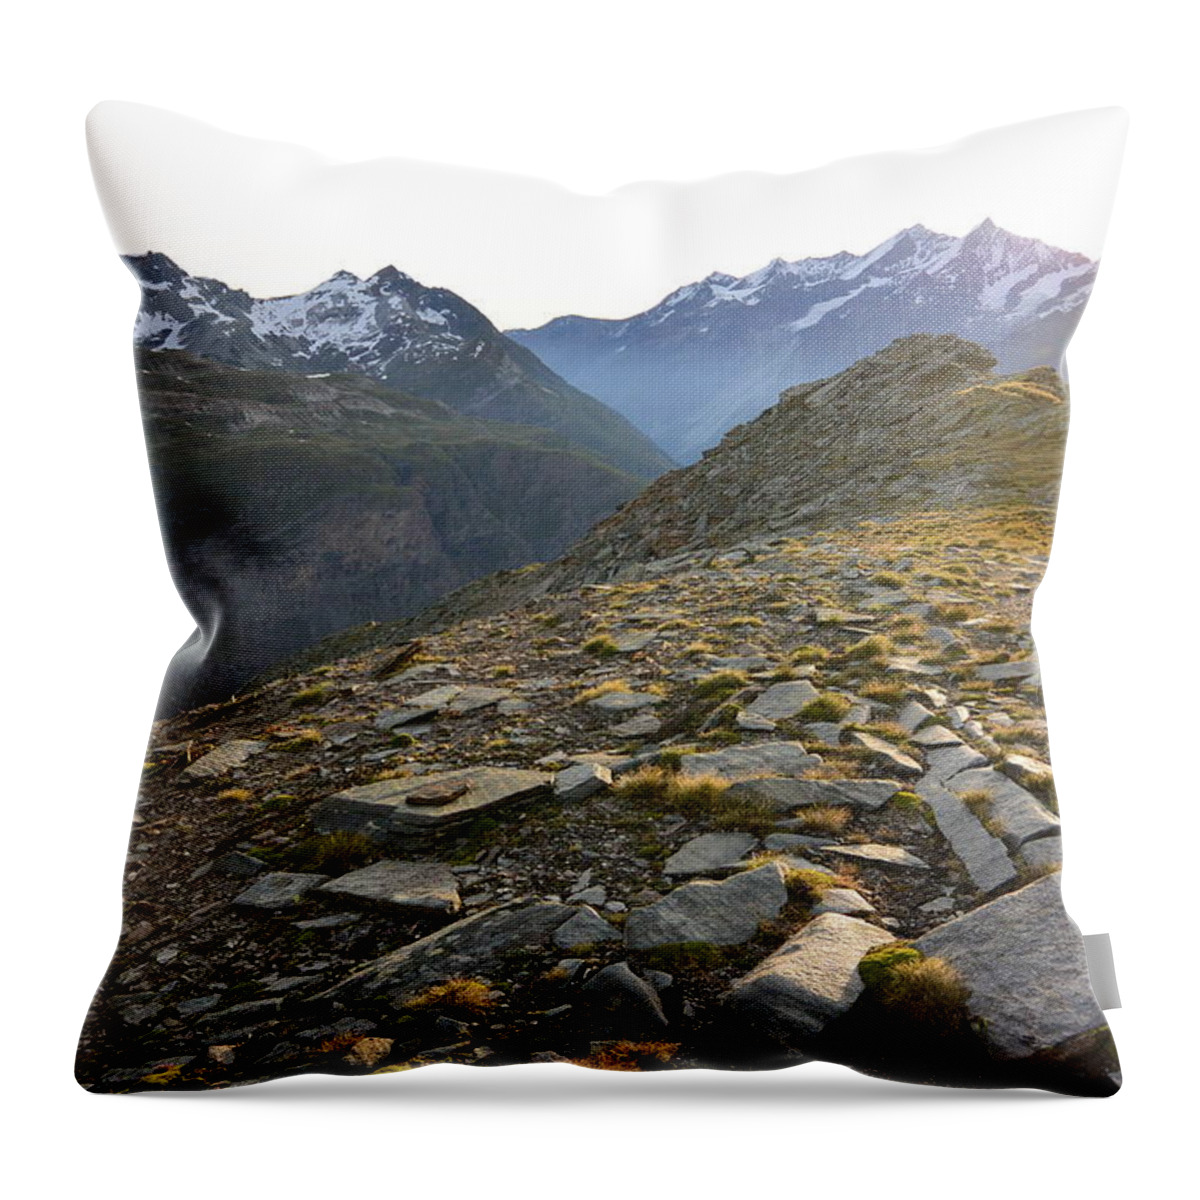 Zermatt Throw Pillow featuring the photograph Sunrise In The Swiss Alps by Two Small Potatoes